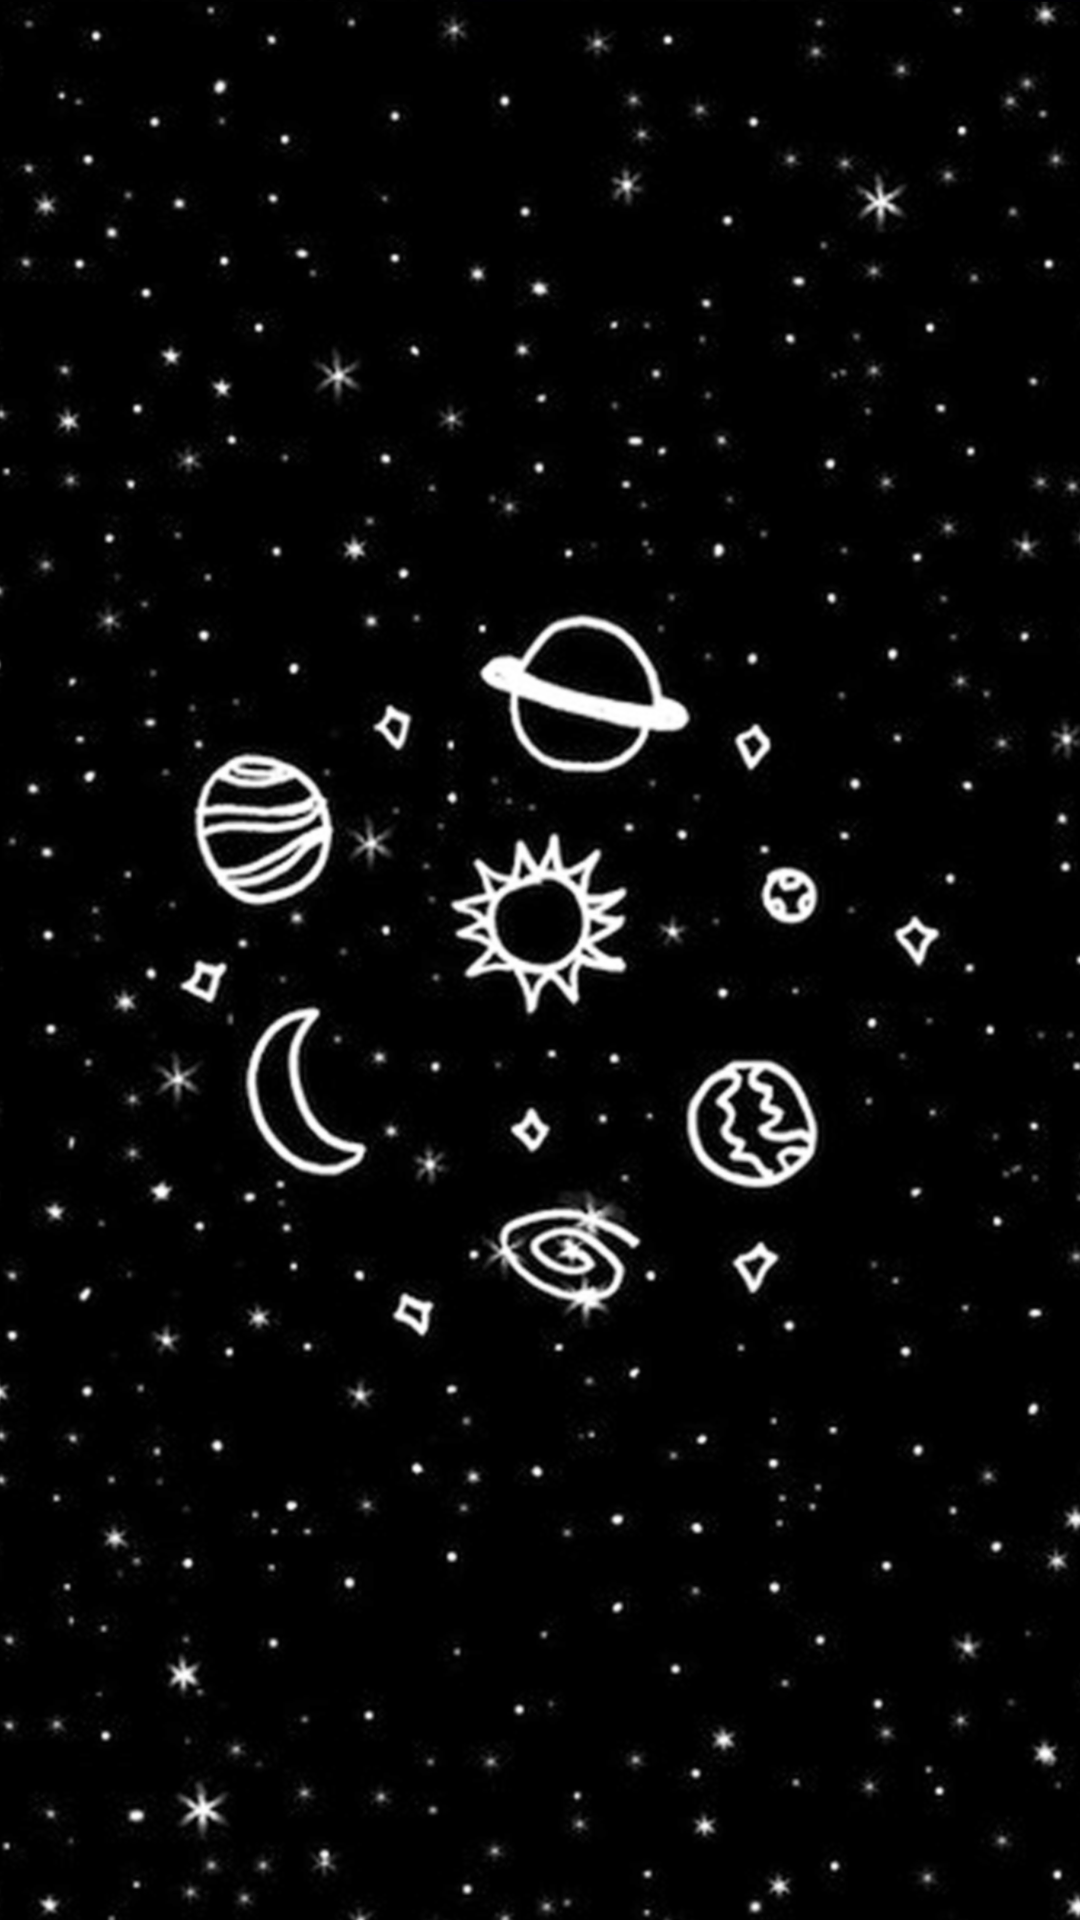 Black and white aesthetic wallpaper of the solar system - NASA, space, doodles, planet